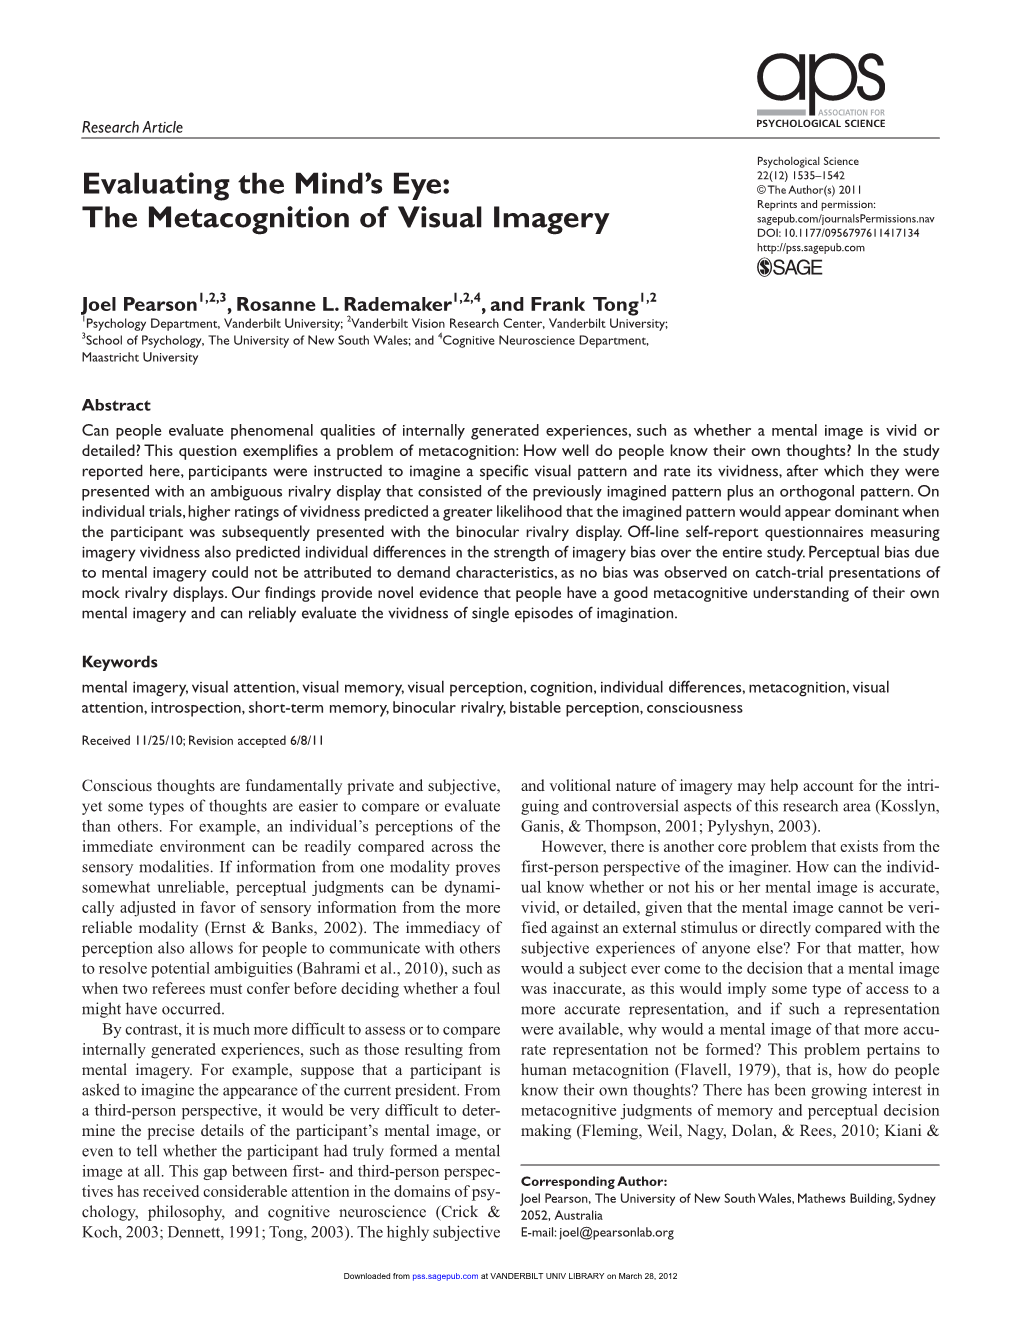 The Metacognition of Visual Imagery DOI: 10.1177/0956797611417134